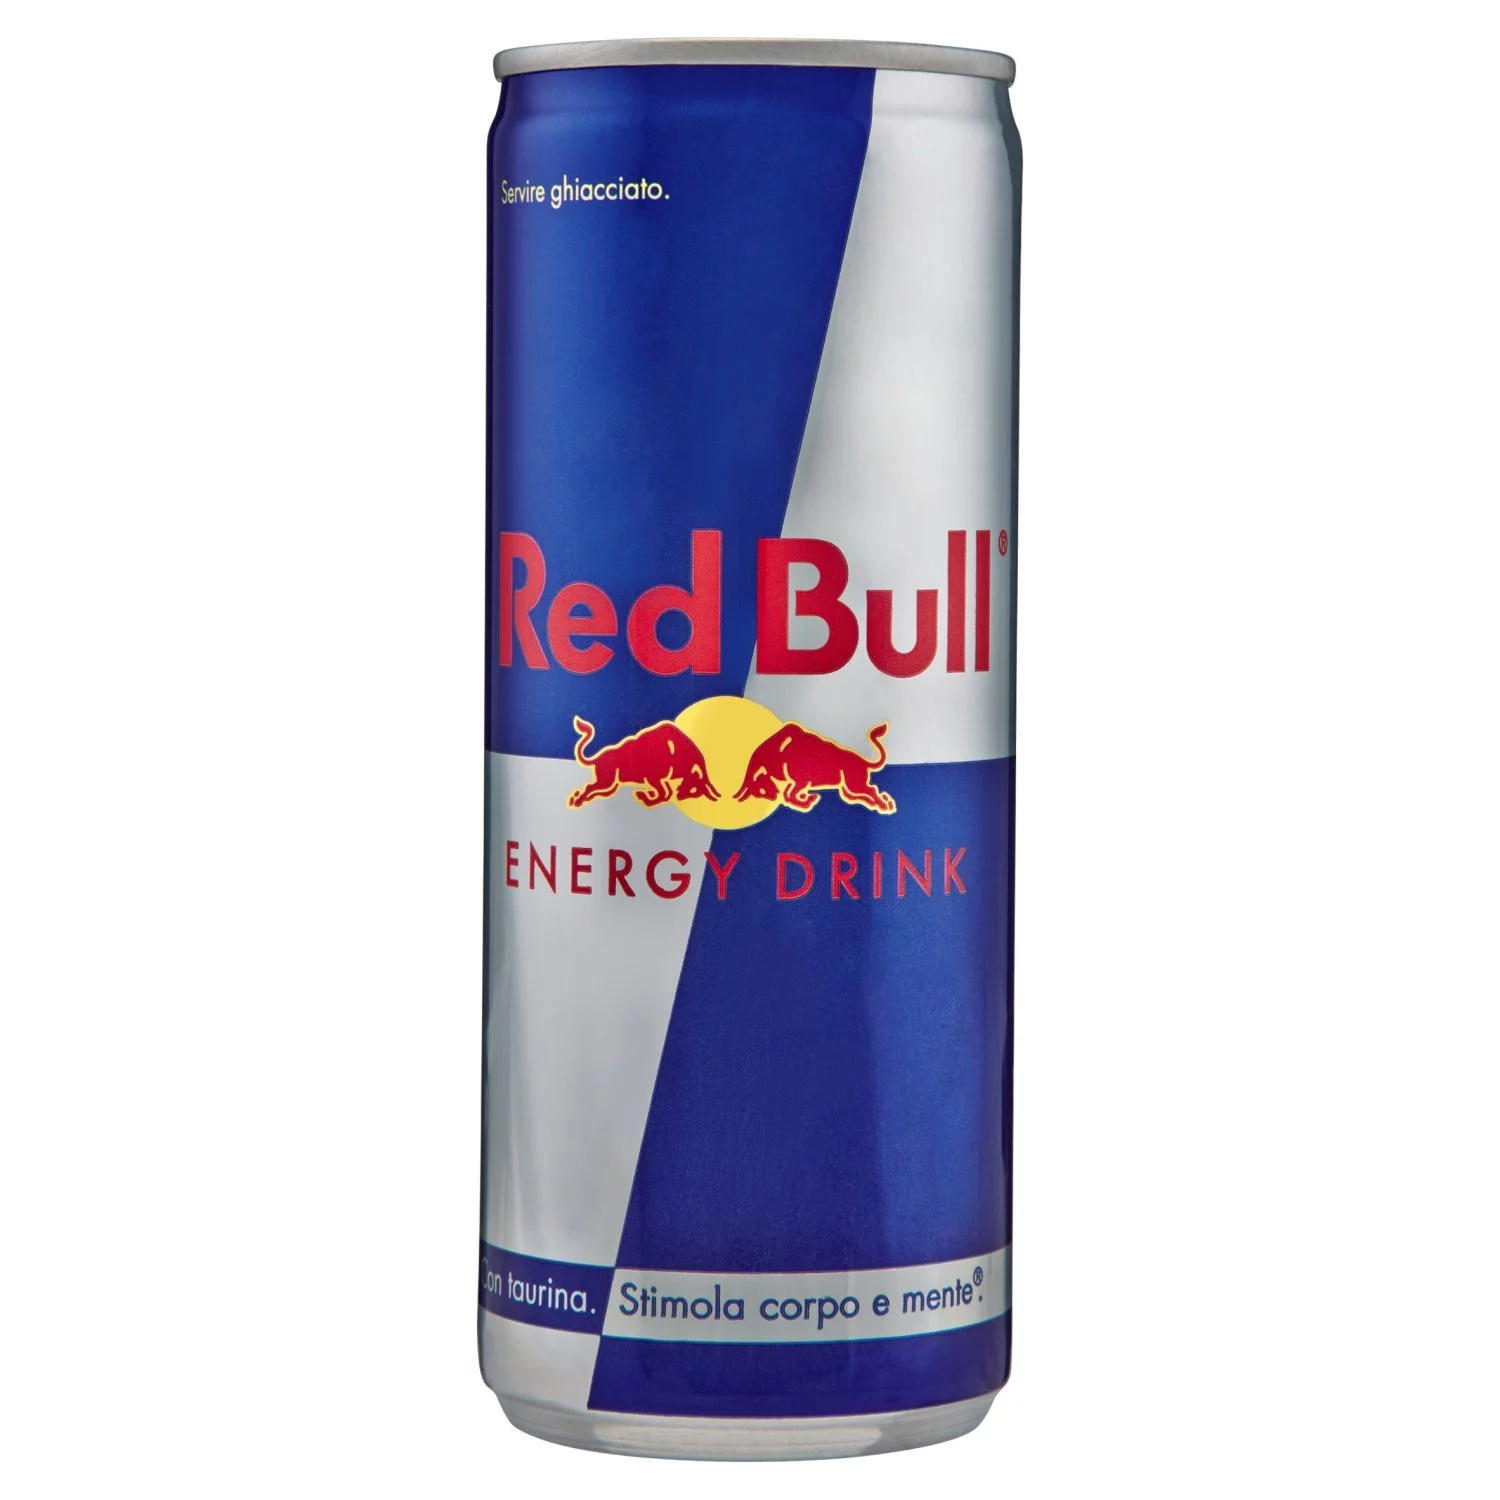 The Million Story Behind Red Bull i'es the Tagline...